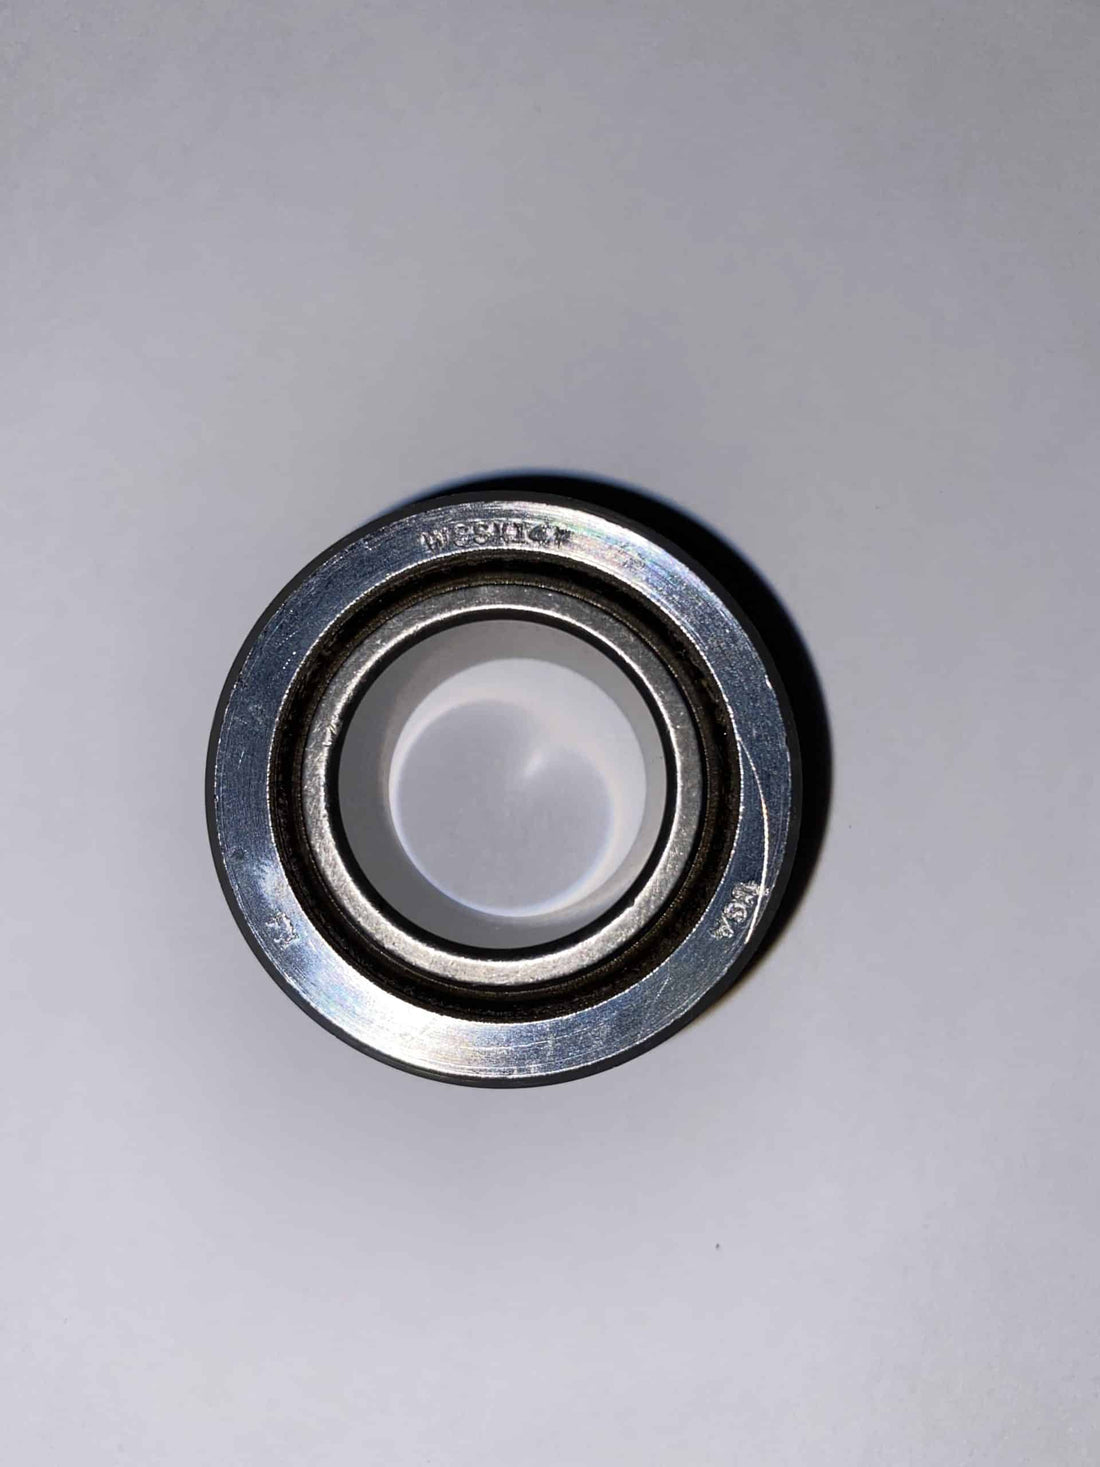 FK Rod Ends 7/8" ID, 1-5/8" OD WSSX14T PTFE Coated Uniball Spherical Bearings F2 Fit (WSSX14T)